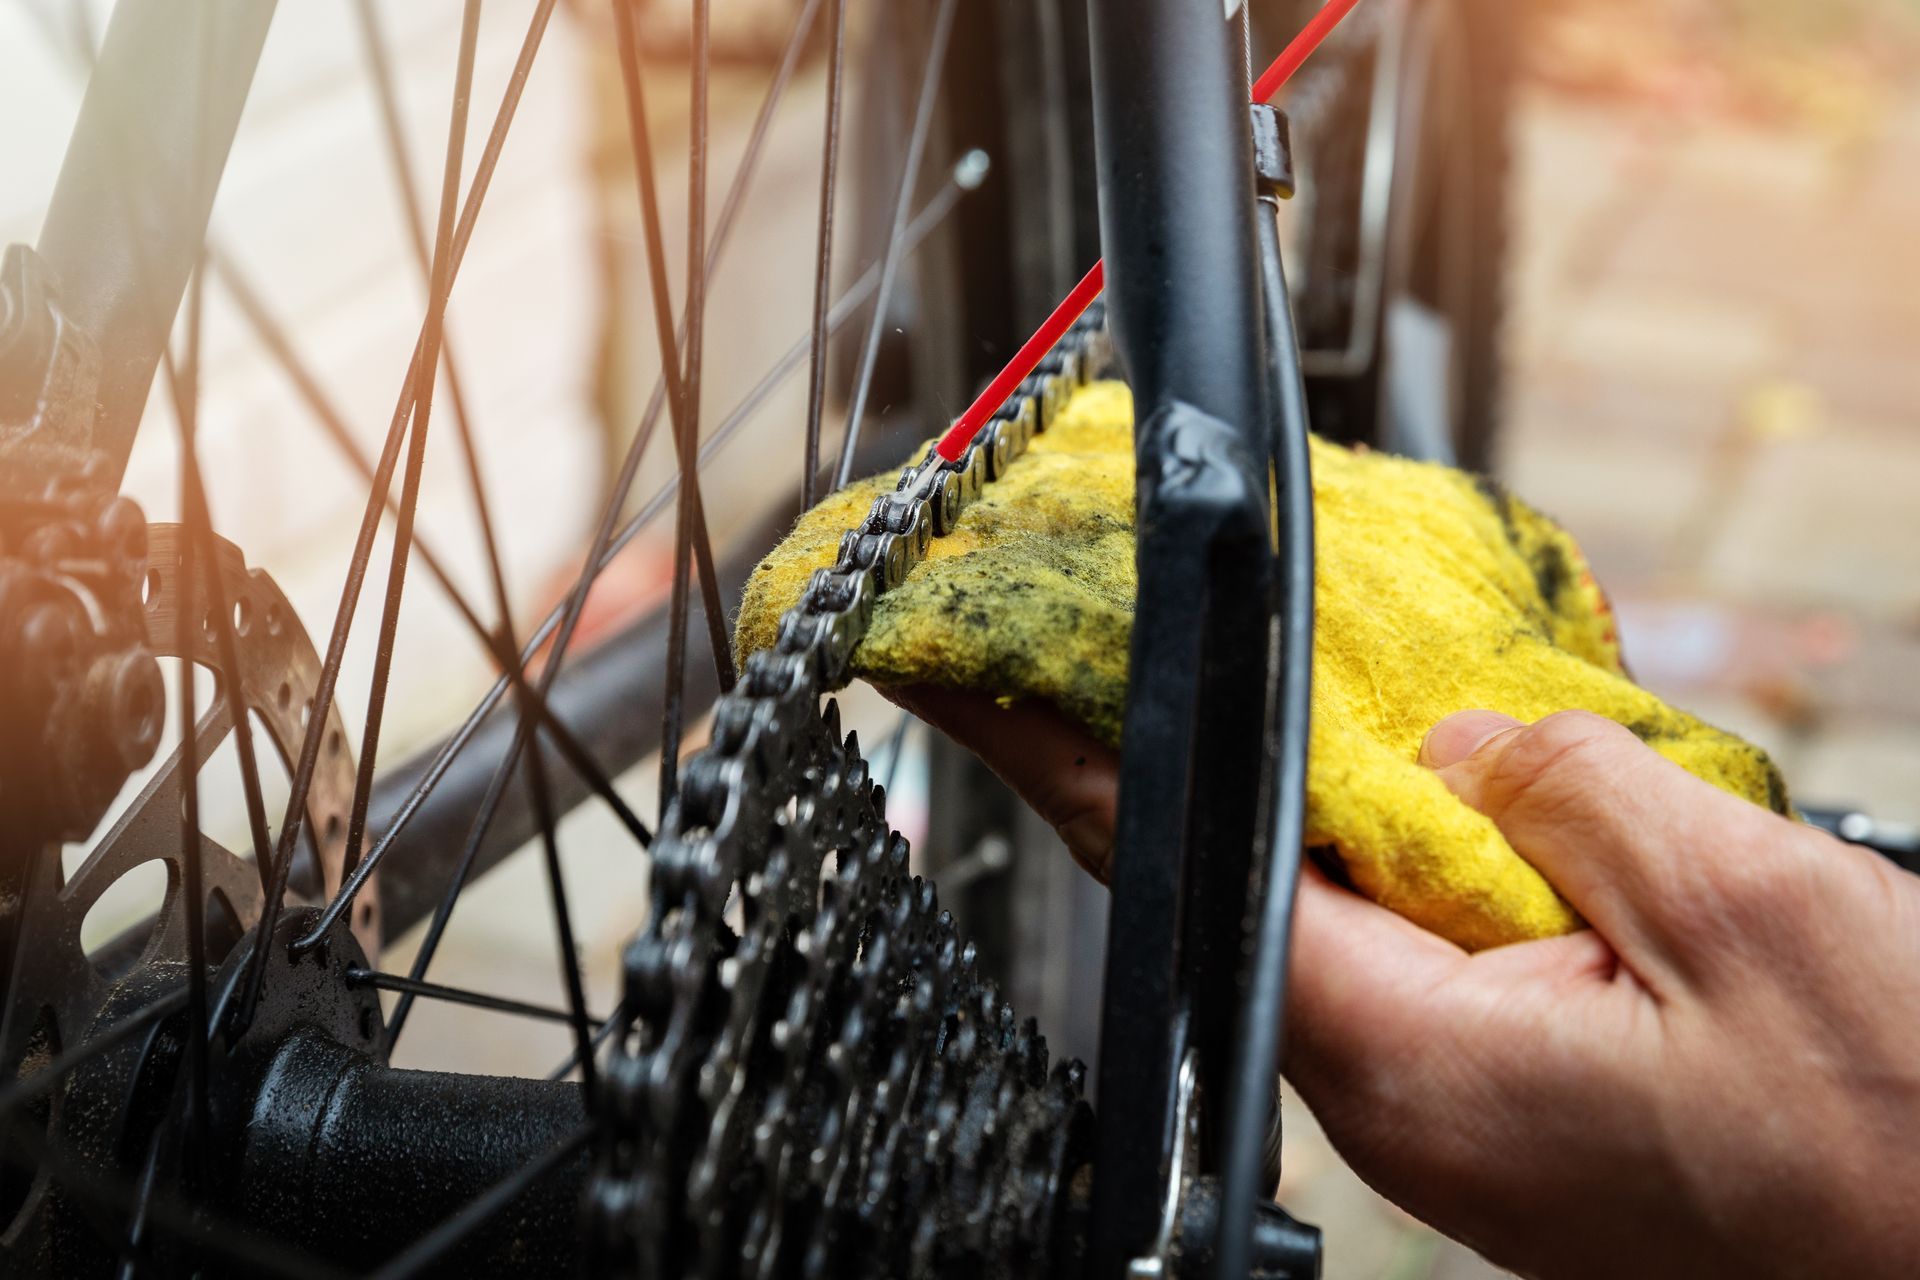 Cleaning and lubricating a bicycle chain as part of a Bicycle Safety checklist